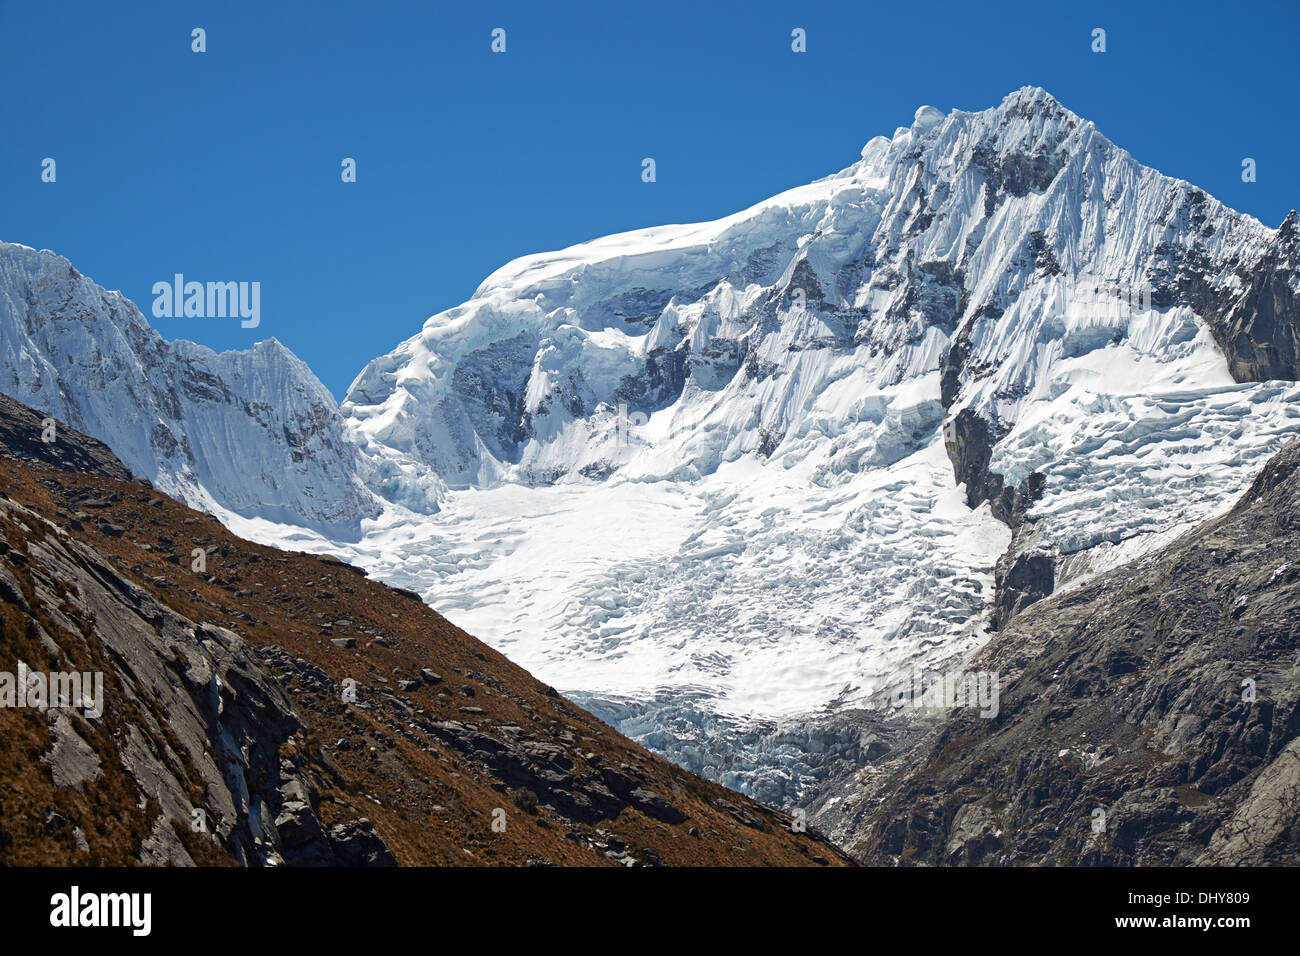 Ranrapalca Summit (6162m) in the Peruvian Andes, South America. Stock Photo